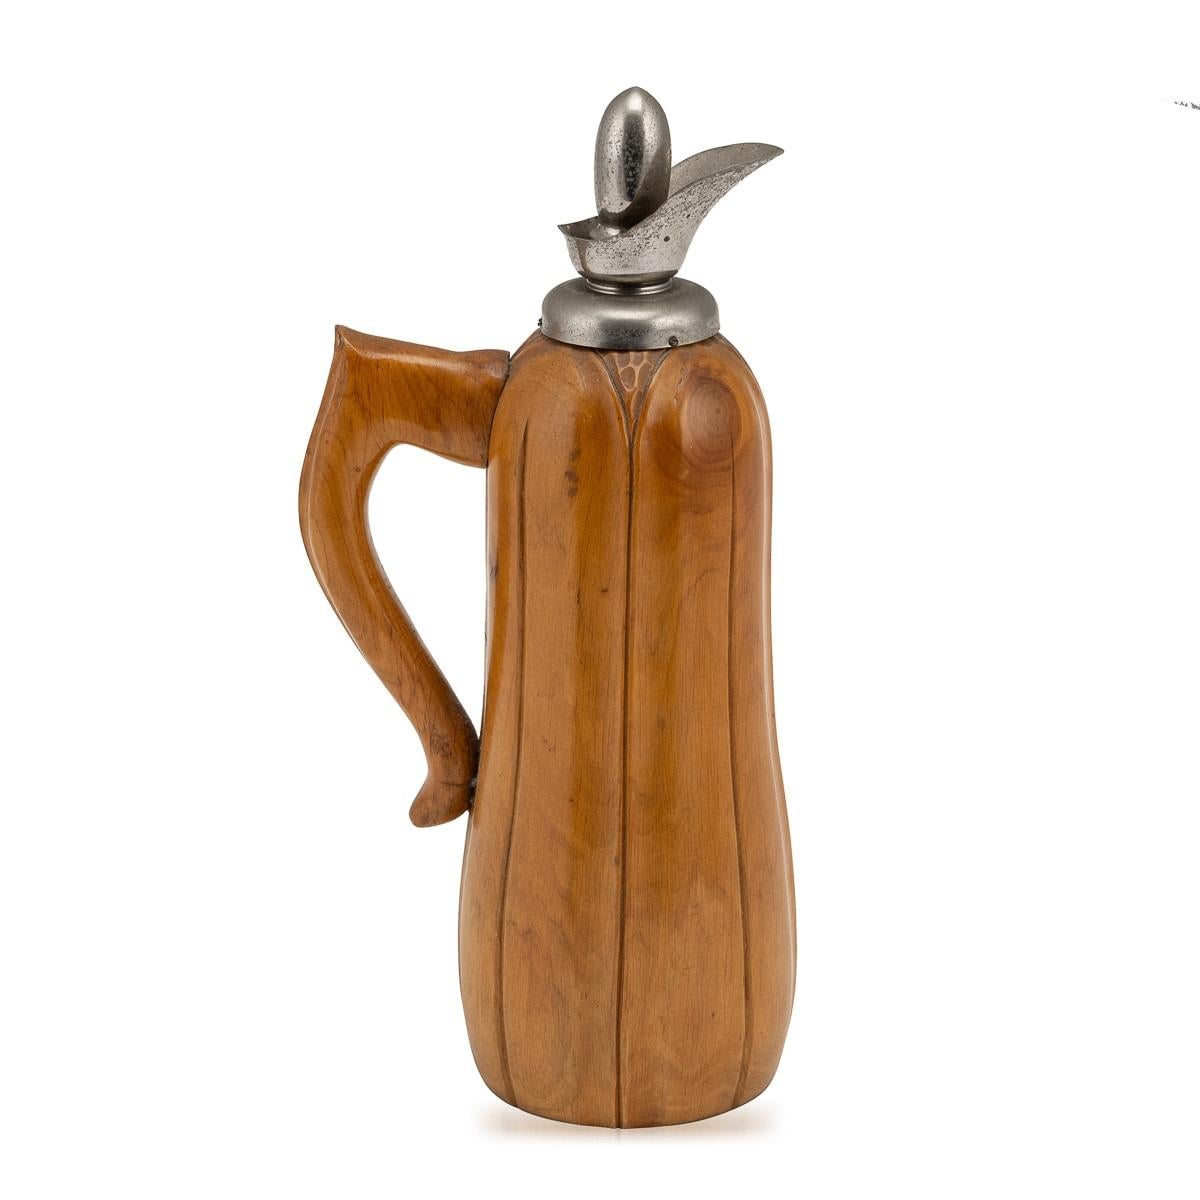 Mid-Century Modern 20th Century Italian Wooden Flask By Aldo Tura For Macabo c.1960 For Sale